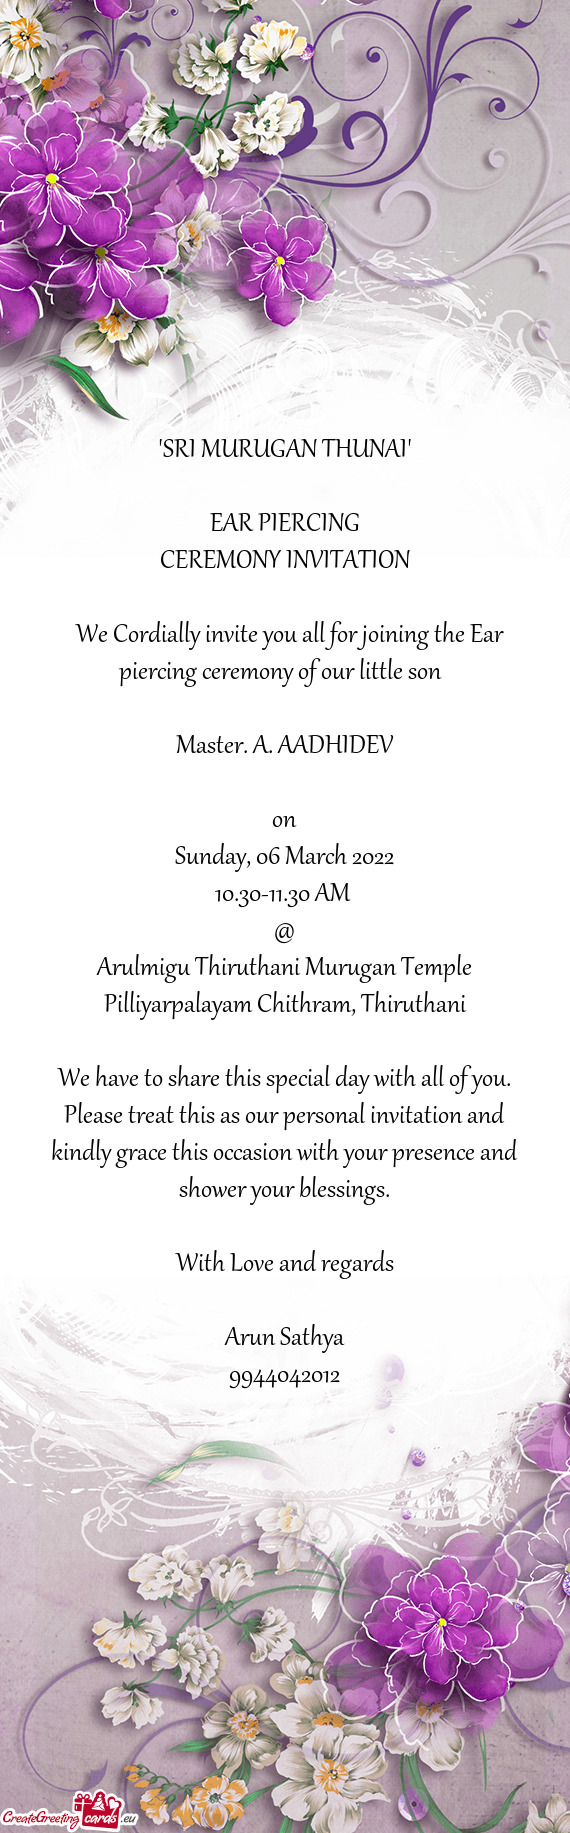 We Cordially invite you all for joining the Ear piercing ceremony of our little son